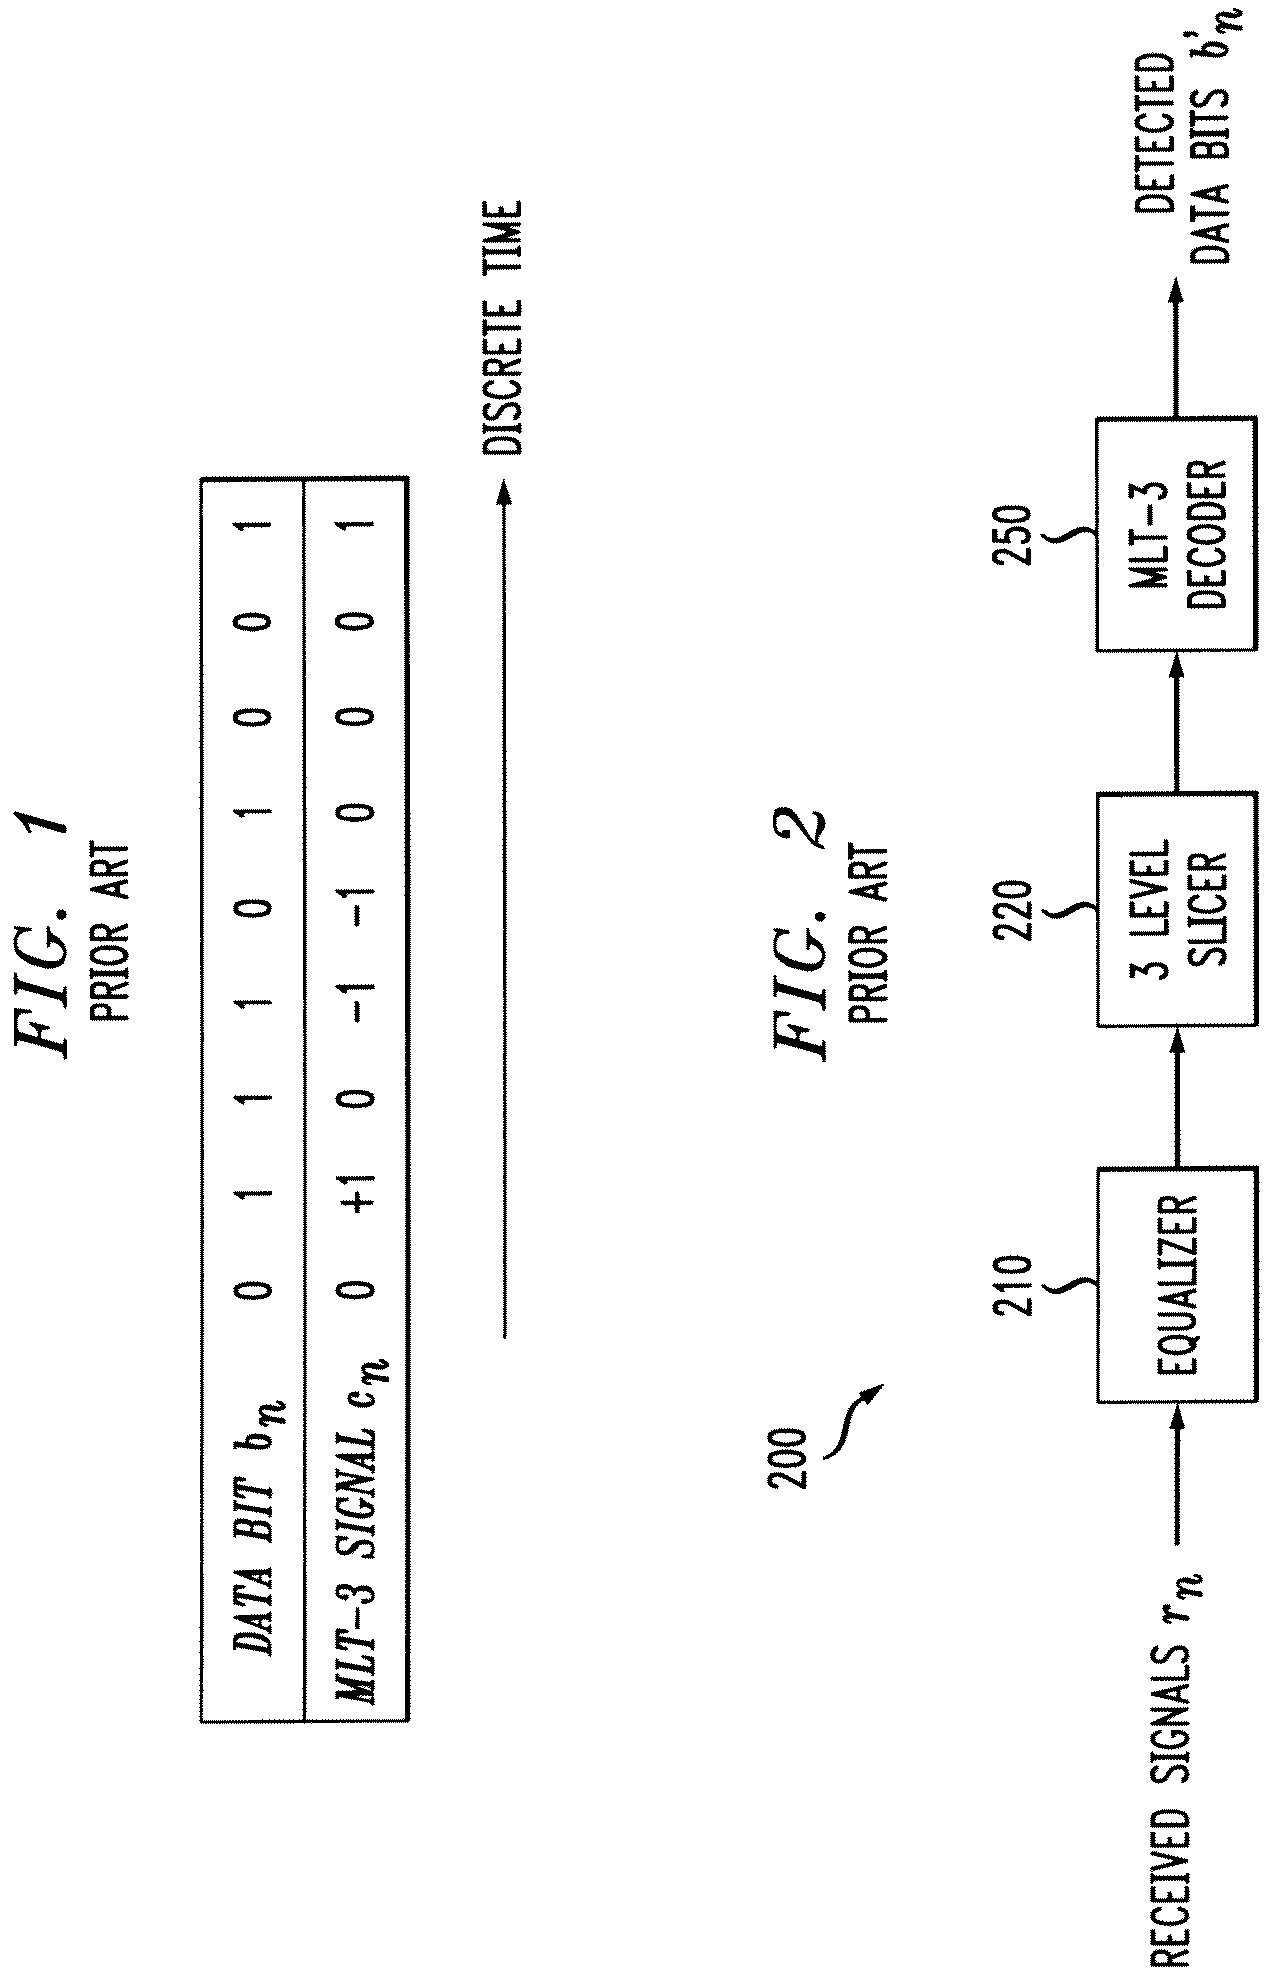 Method and apparatus for joint equalization and decoding of multilevel codes